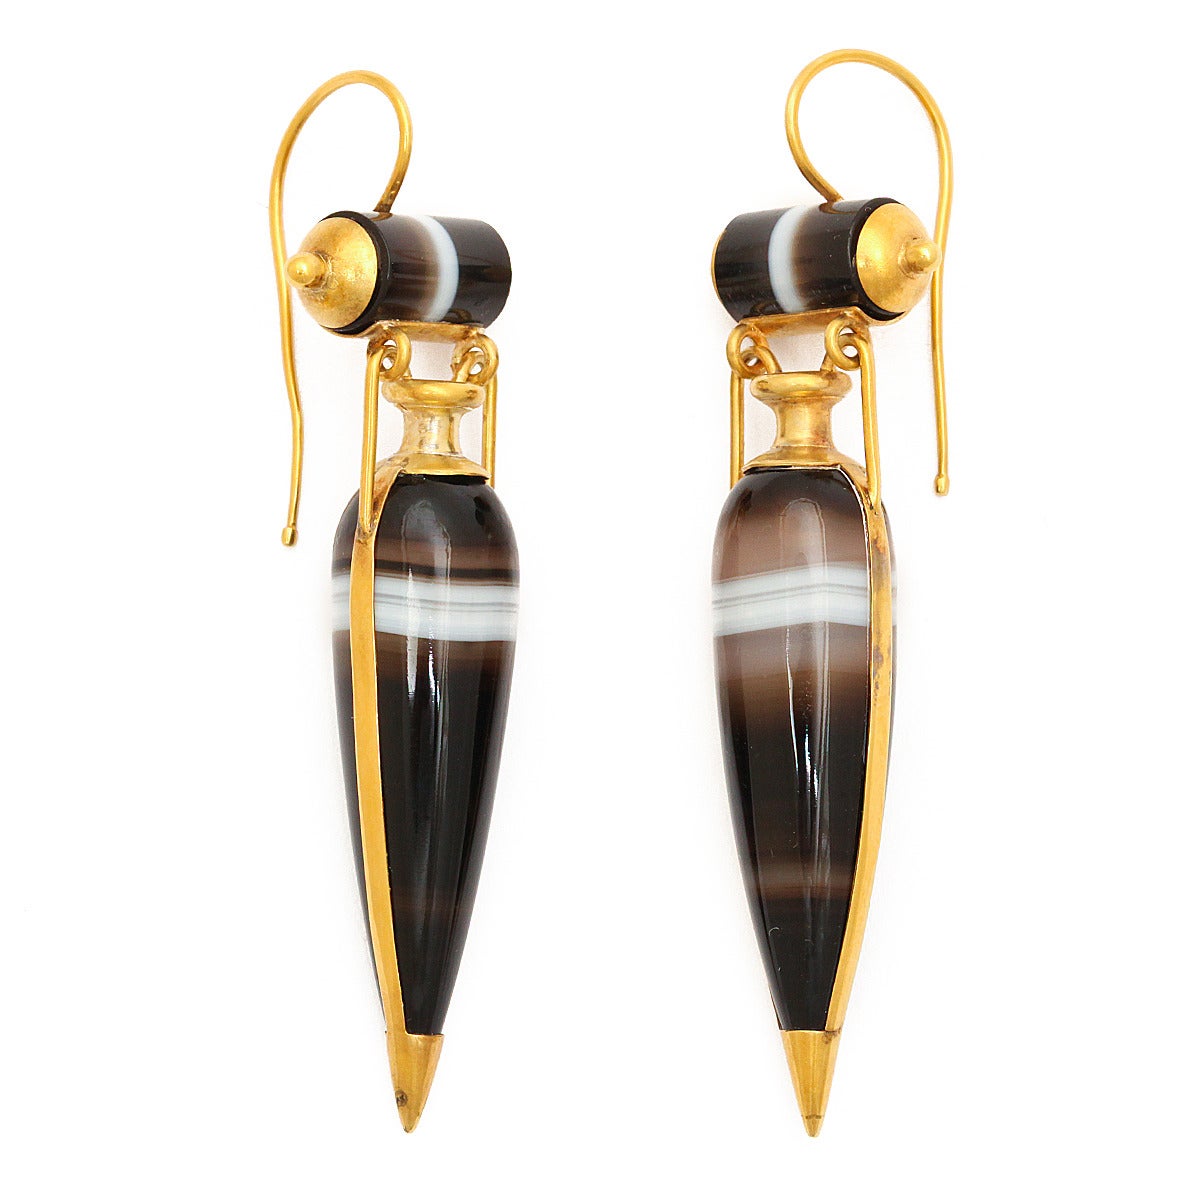 Victorian Classical Revival sardonyx (banded agate) amphora-form pendant earrings, set in a gold frame. 

English, ca. 1890
Length: 2 3/8 inches